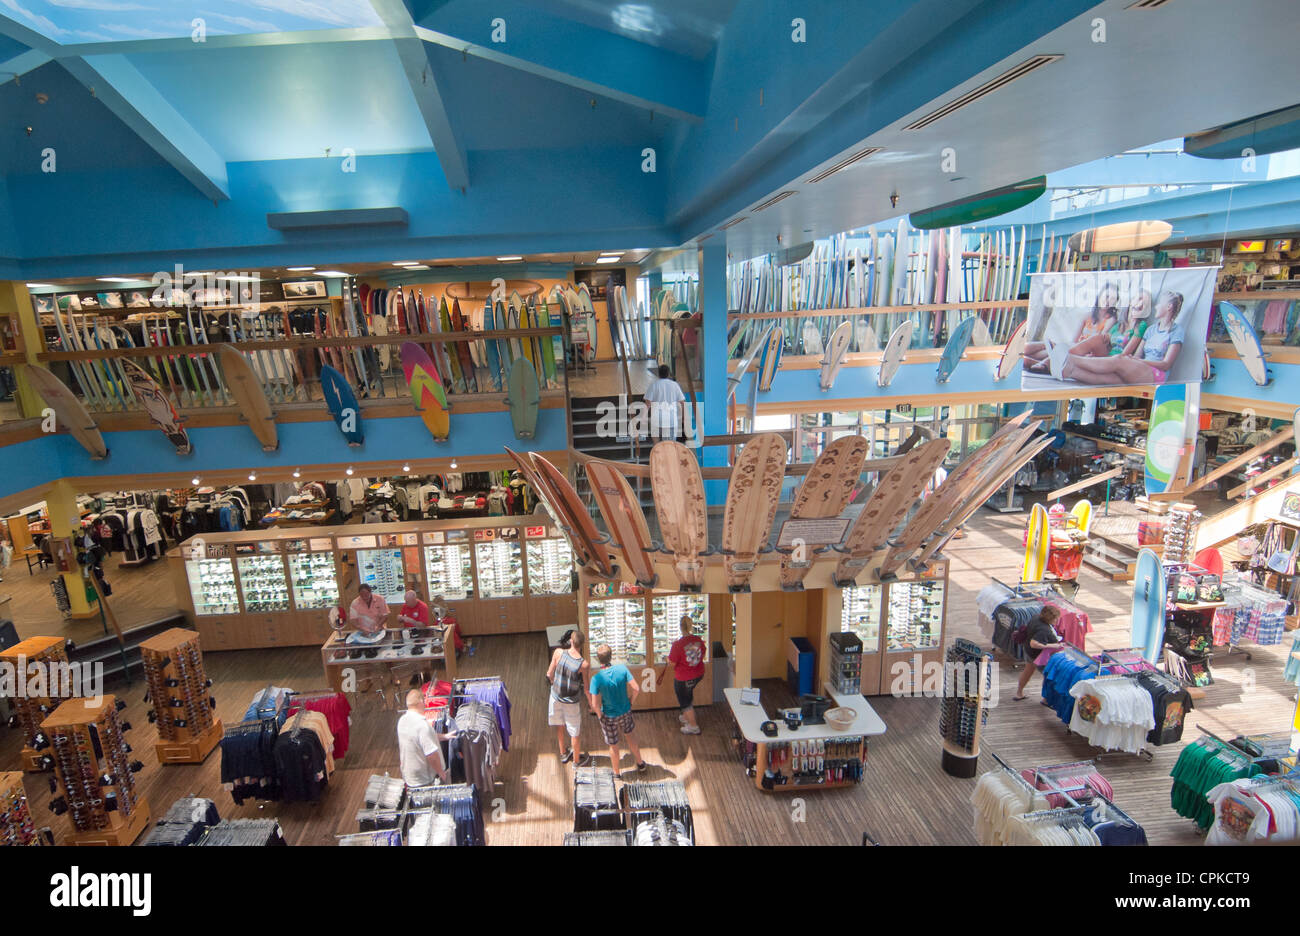 The Ron Jon Surf Shop is a world famous Art Deco palace of everything surfing. Stock Photo